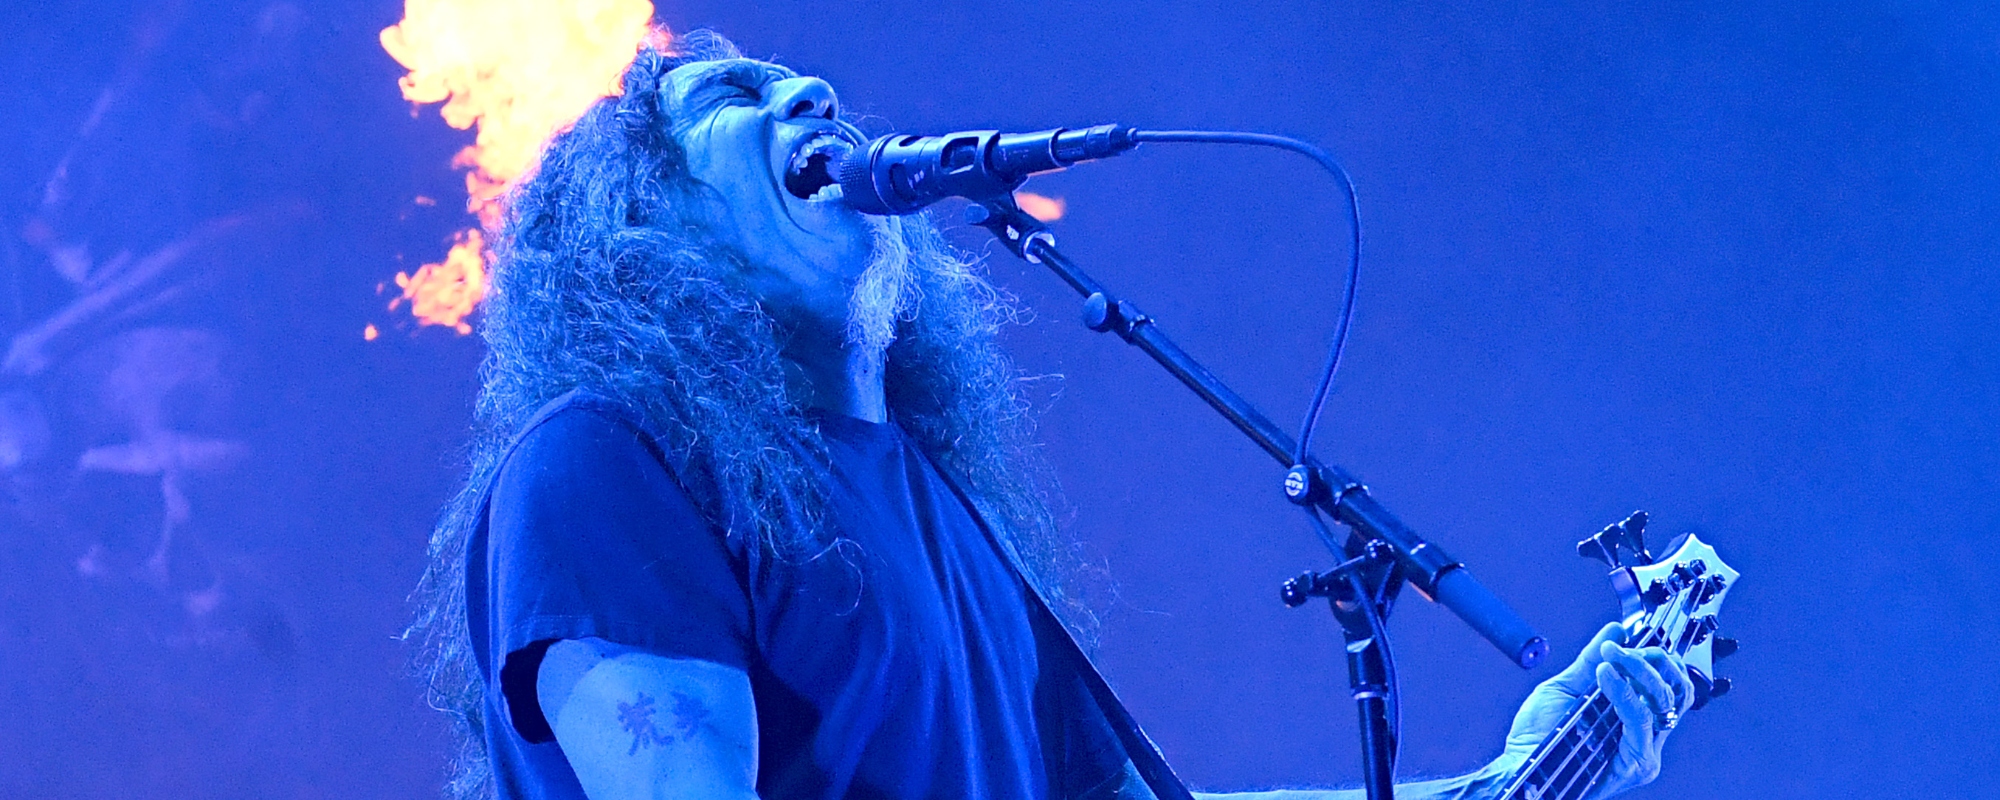 Slayer Announces Reunion and First Shows—Joining Motley Crue, Judas Priest, & More